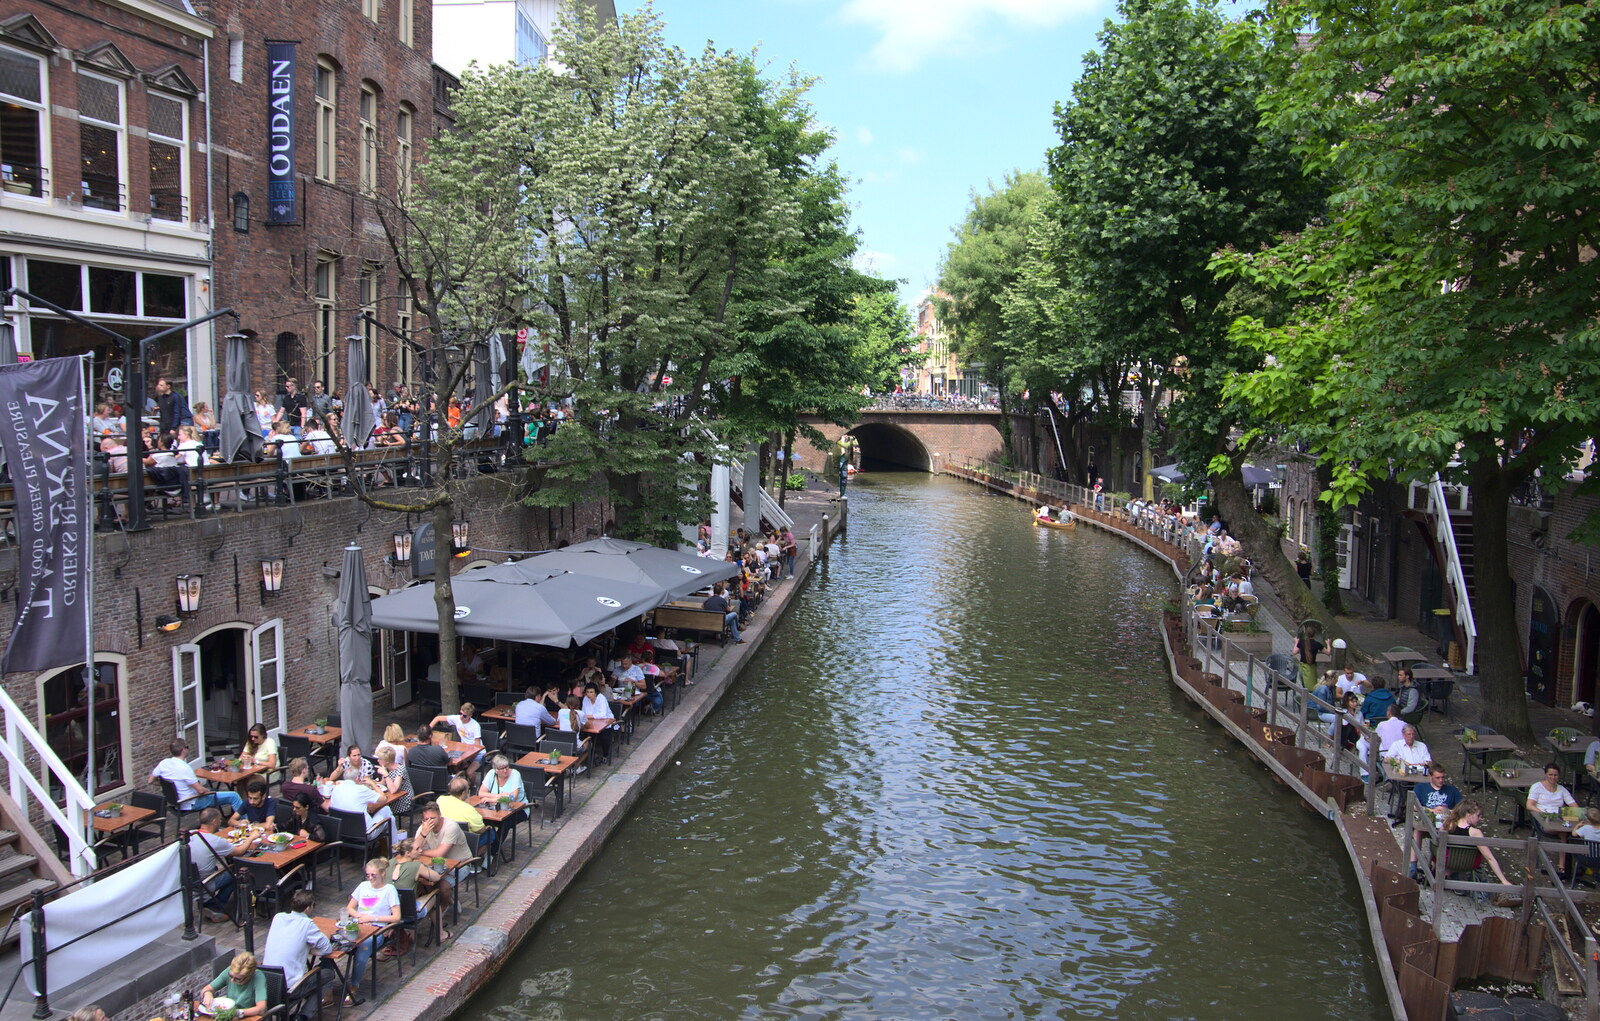 More canal action from A Postcard from Utrecht, Nederlands - 10th June 2018